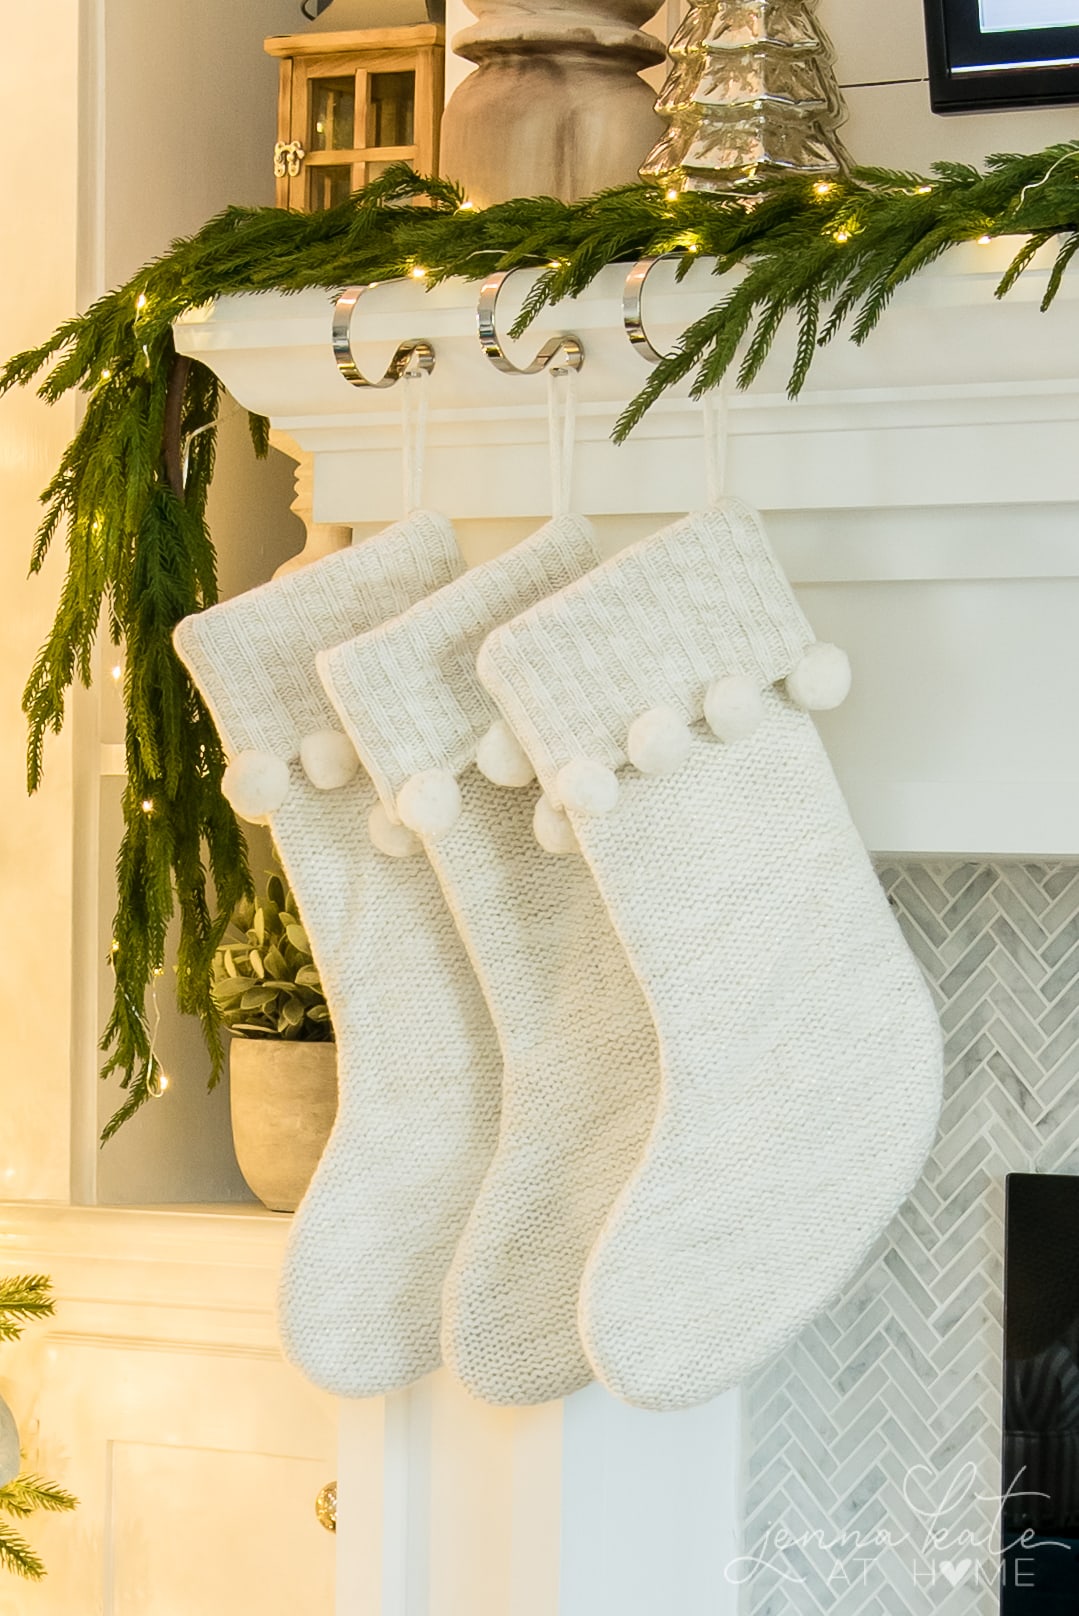 White knit stockings with pom poms hung on the mantel